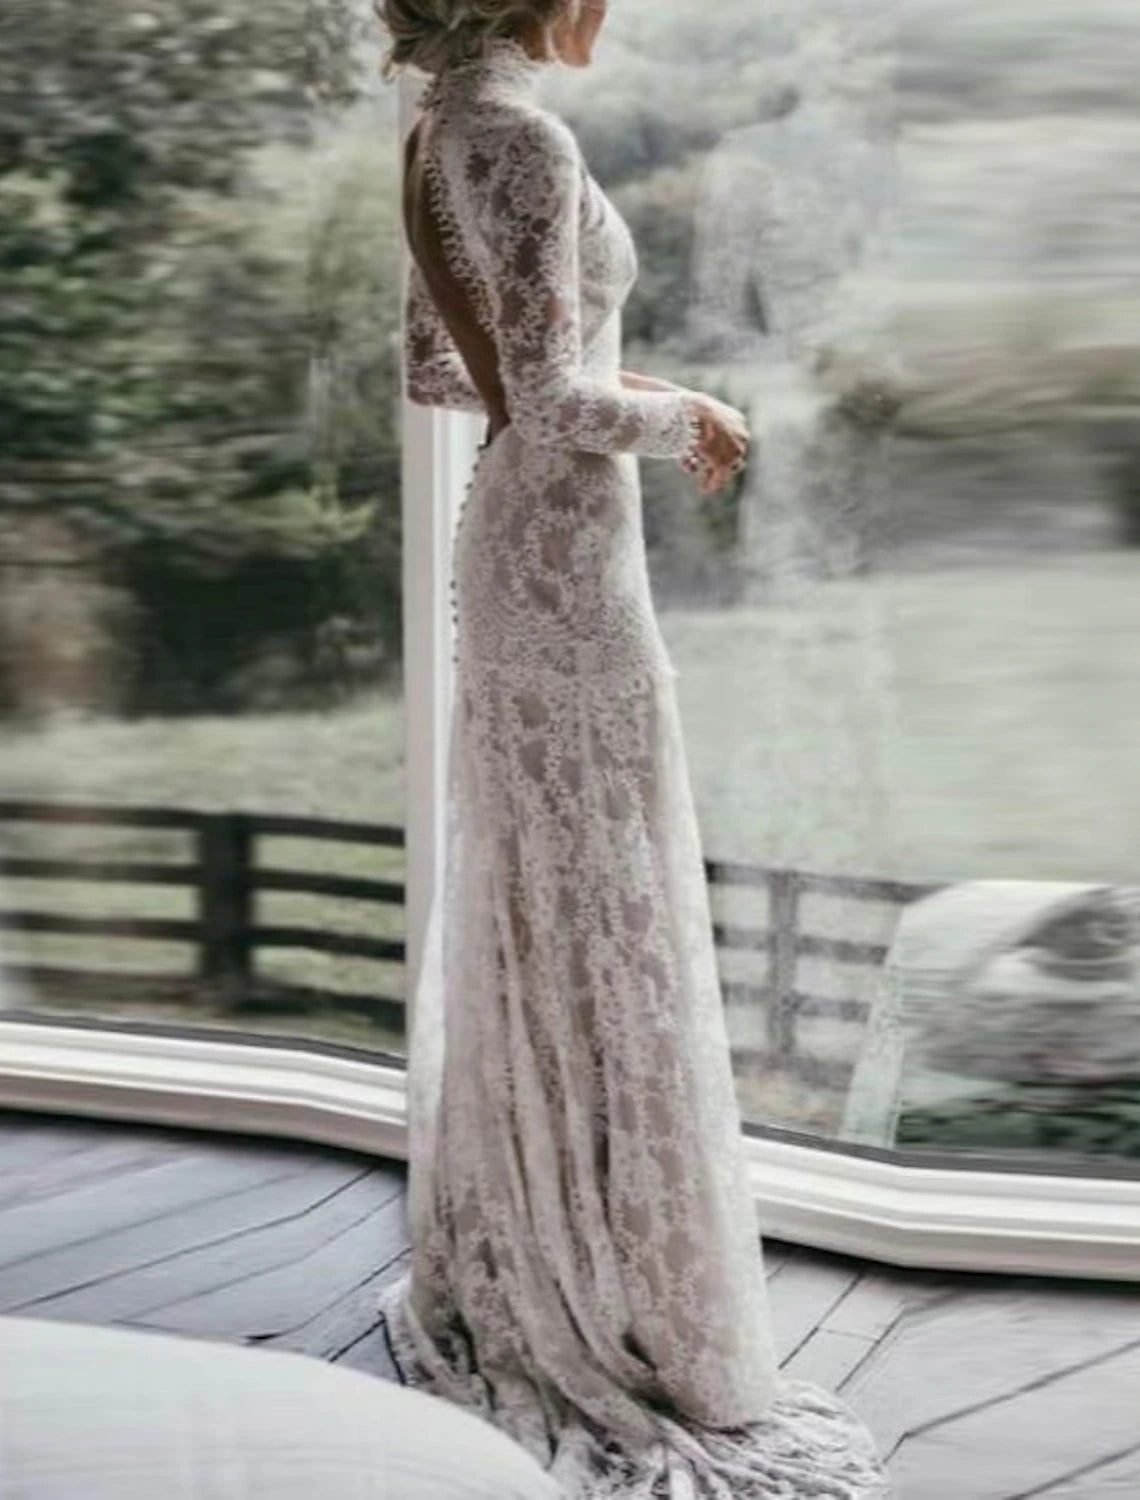 Beach Boho Wedding Dresses Sheath / Column High Neck Long Sleeve Court Train Lace Outdoor Bridal Gowns With Appliques Solid Color Summer Fall Wedding Party